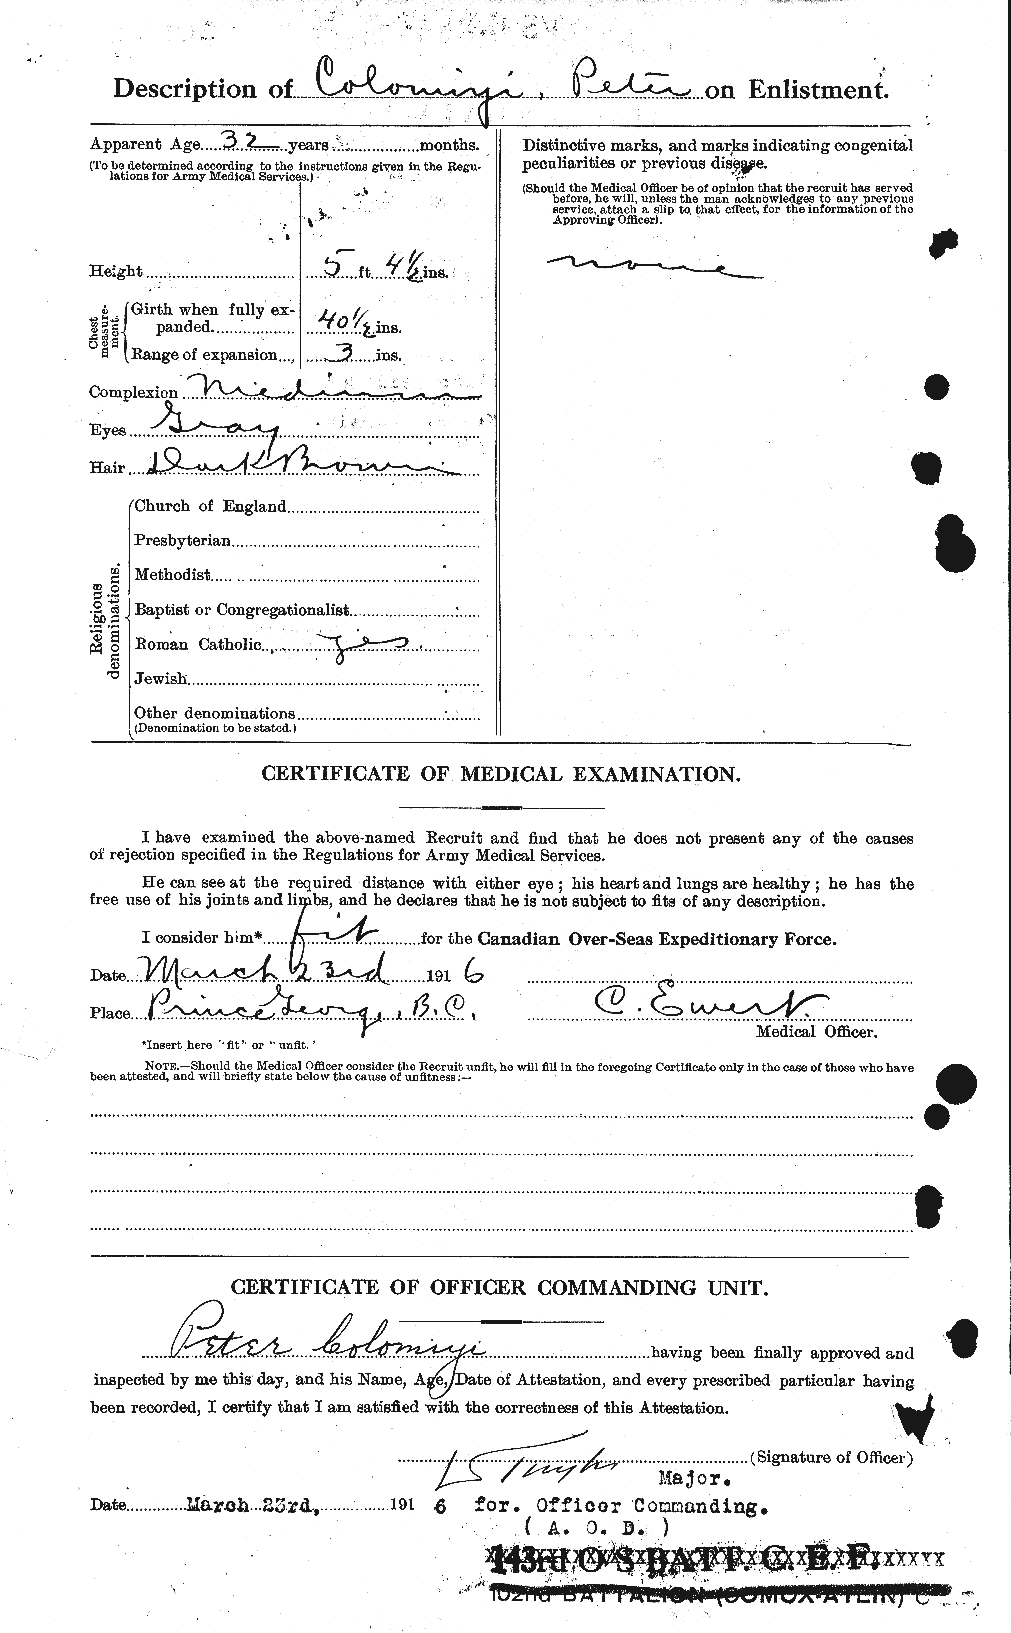 Personnel Records of the First World War - CEF 067897b